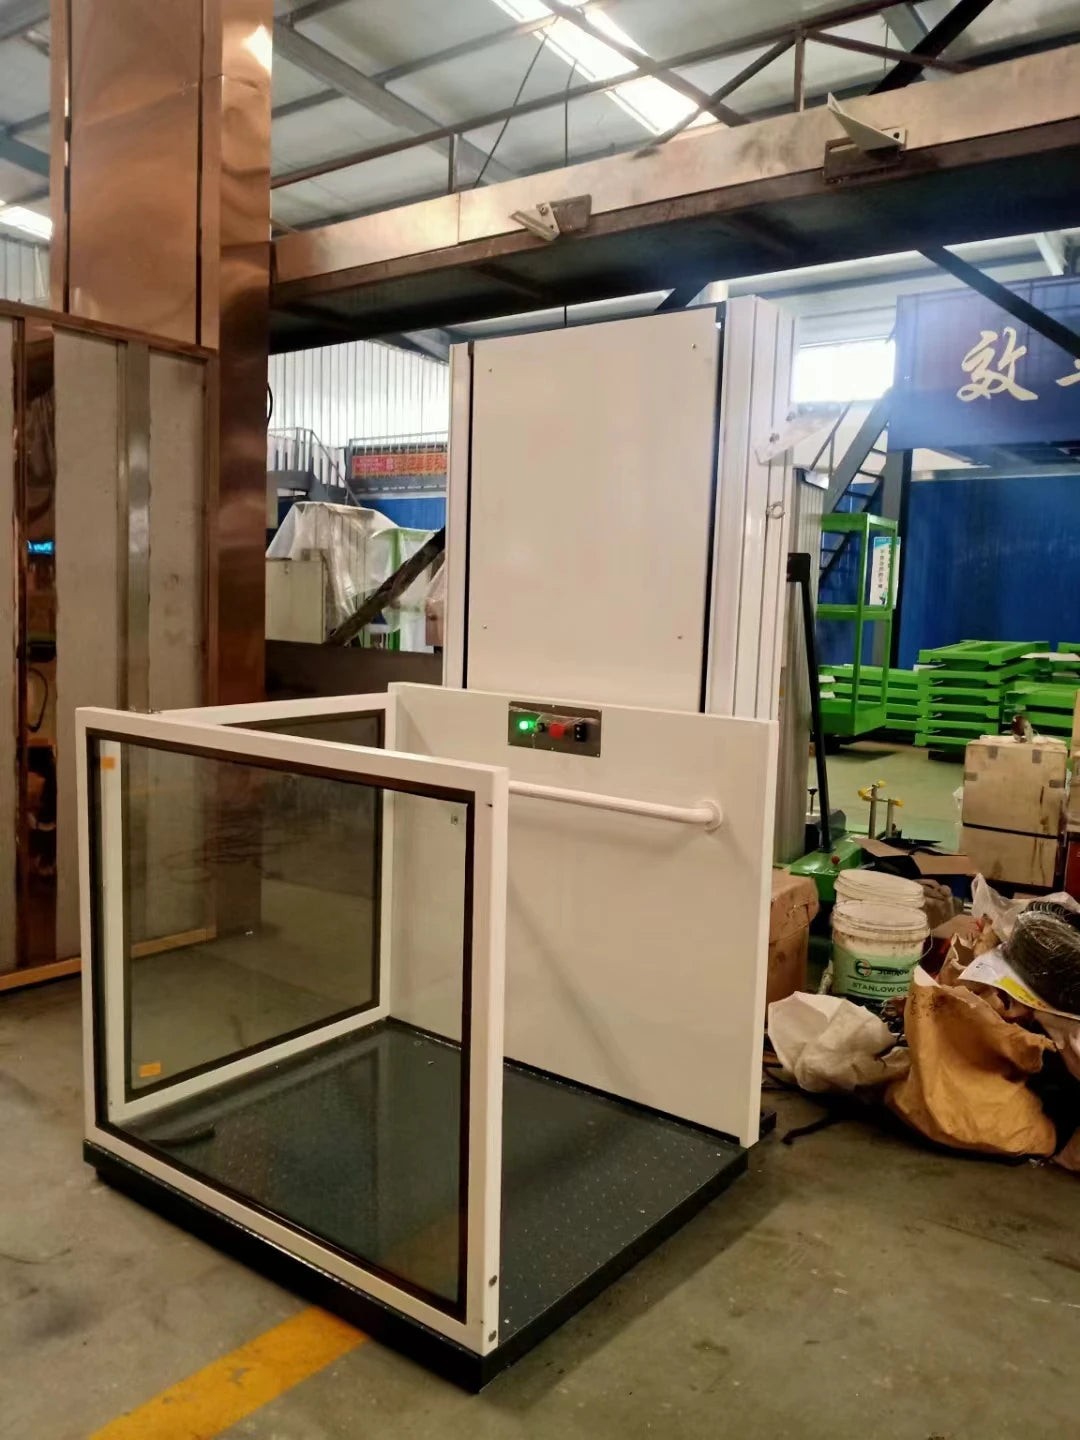 Wheelchair-Lift-House Hydraulic-Lift Vertical 6m CE  Ce-Iso Made-In-China